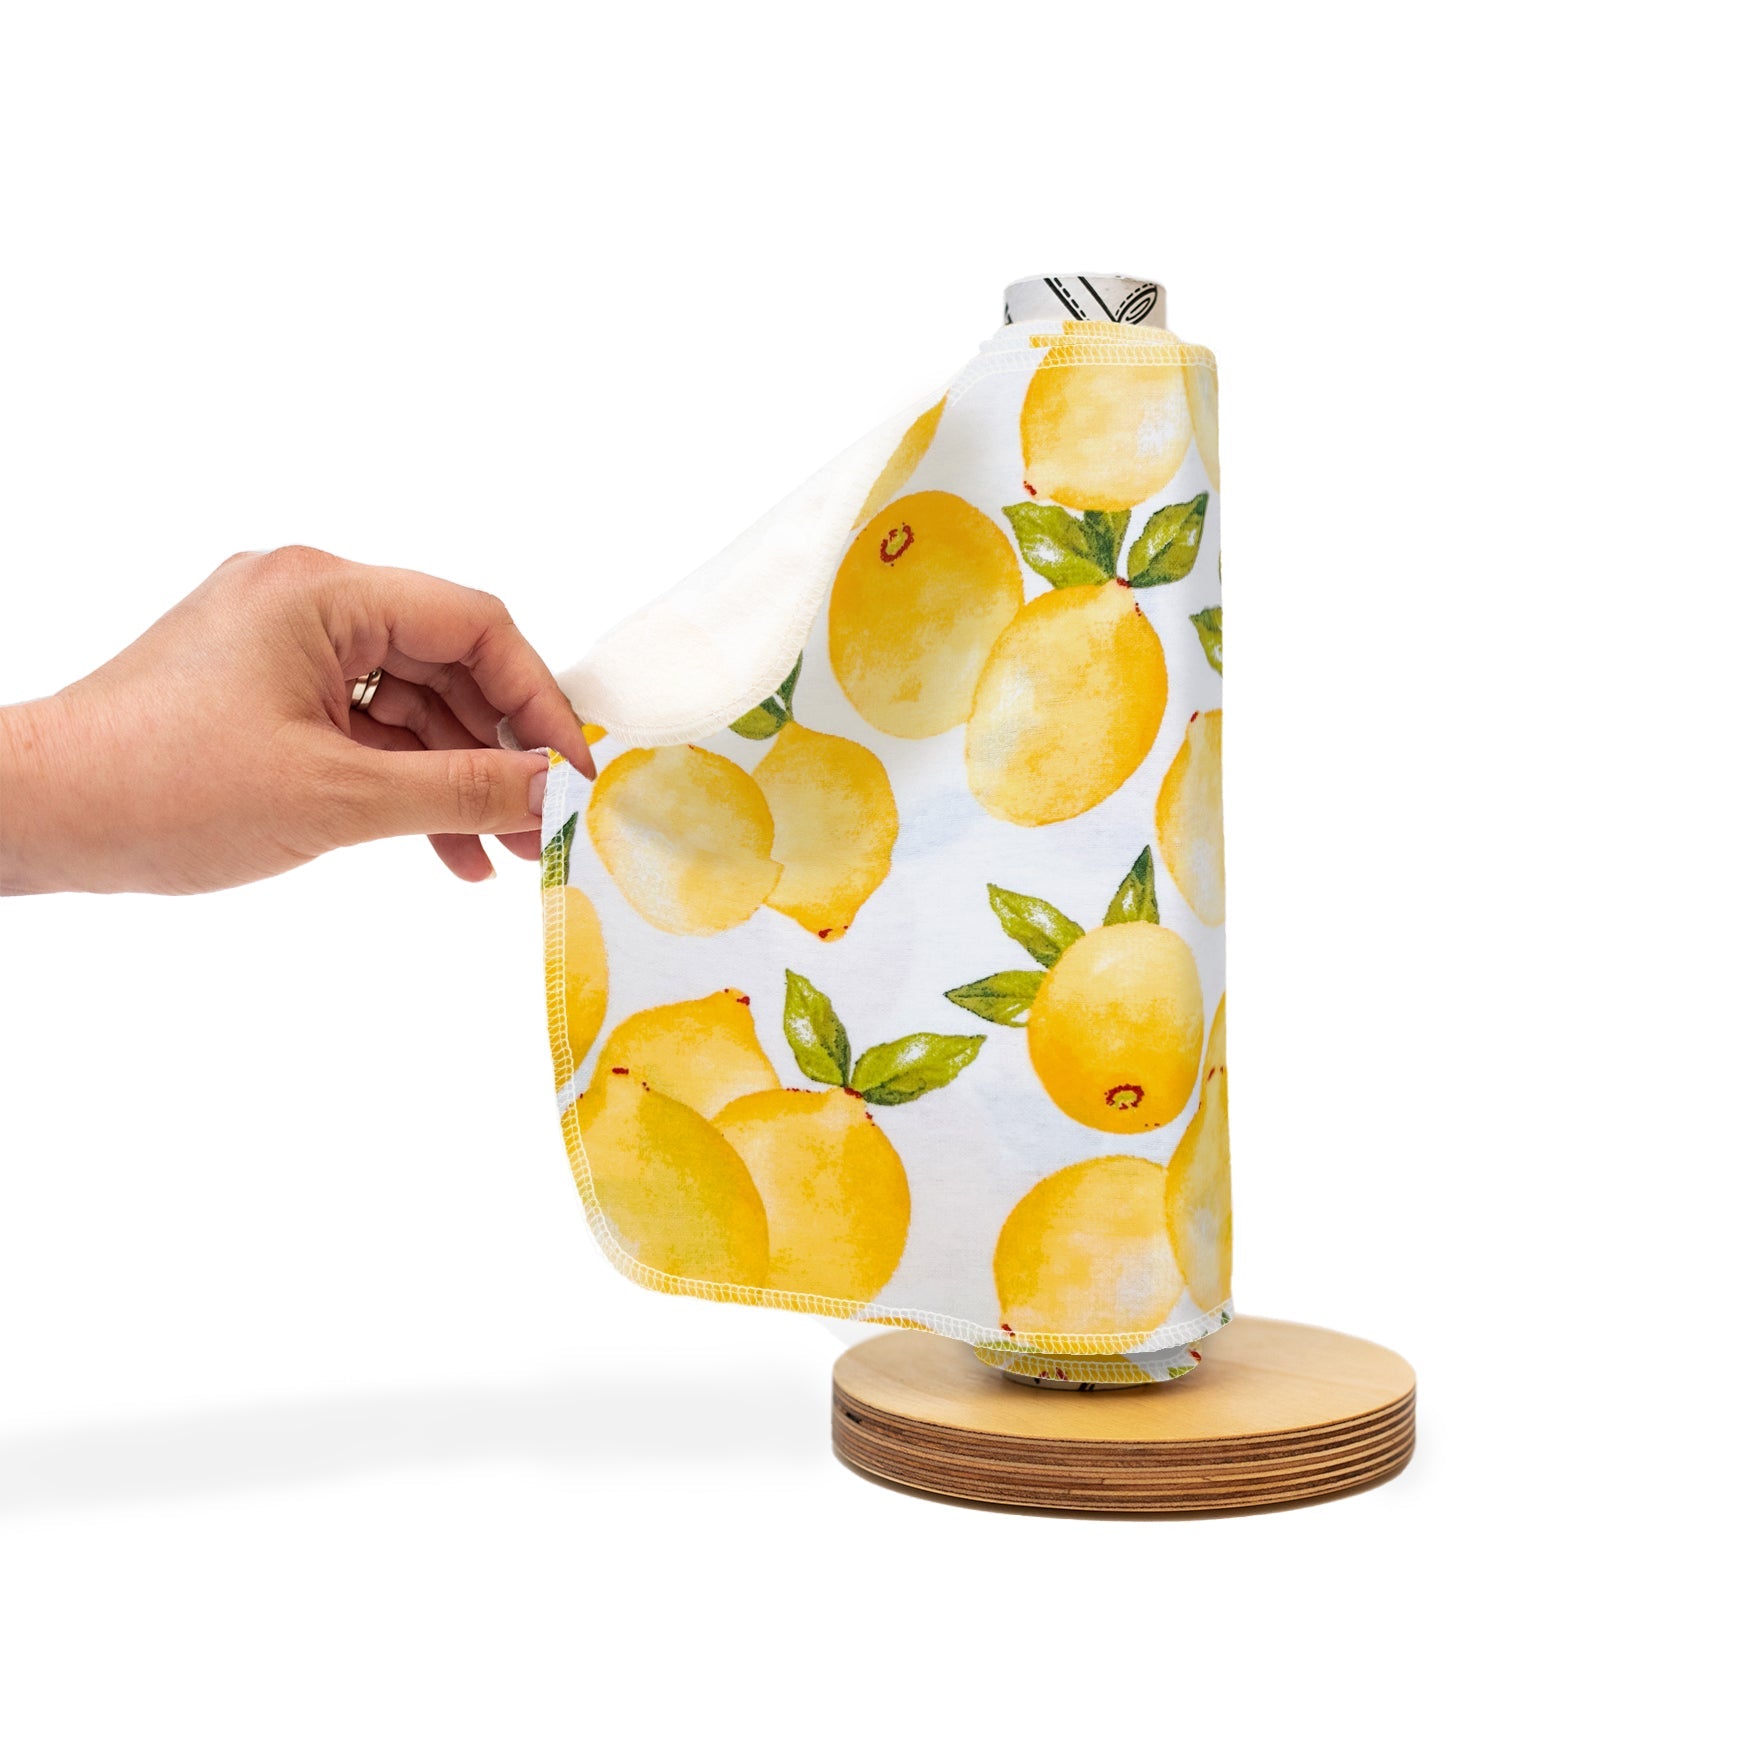 Reusable Paper Towels - Bees on Yellow